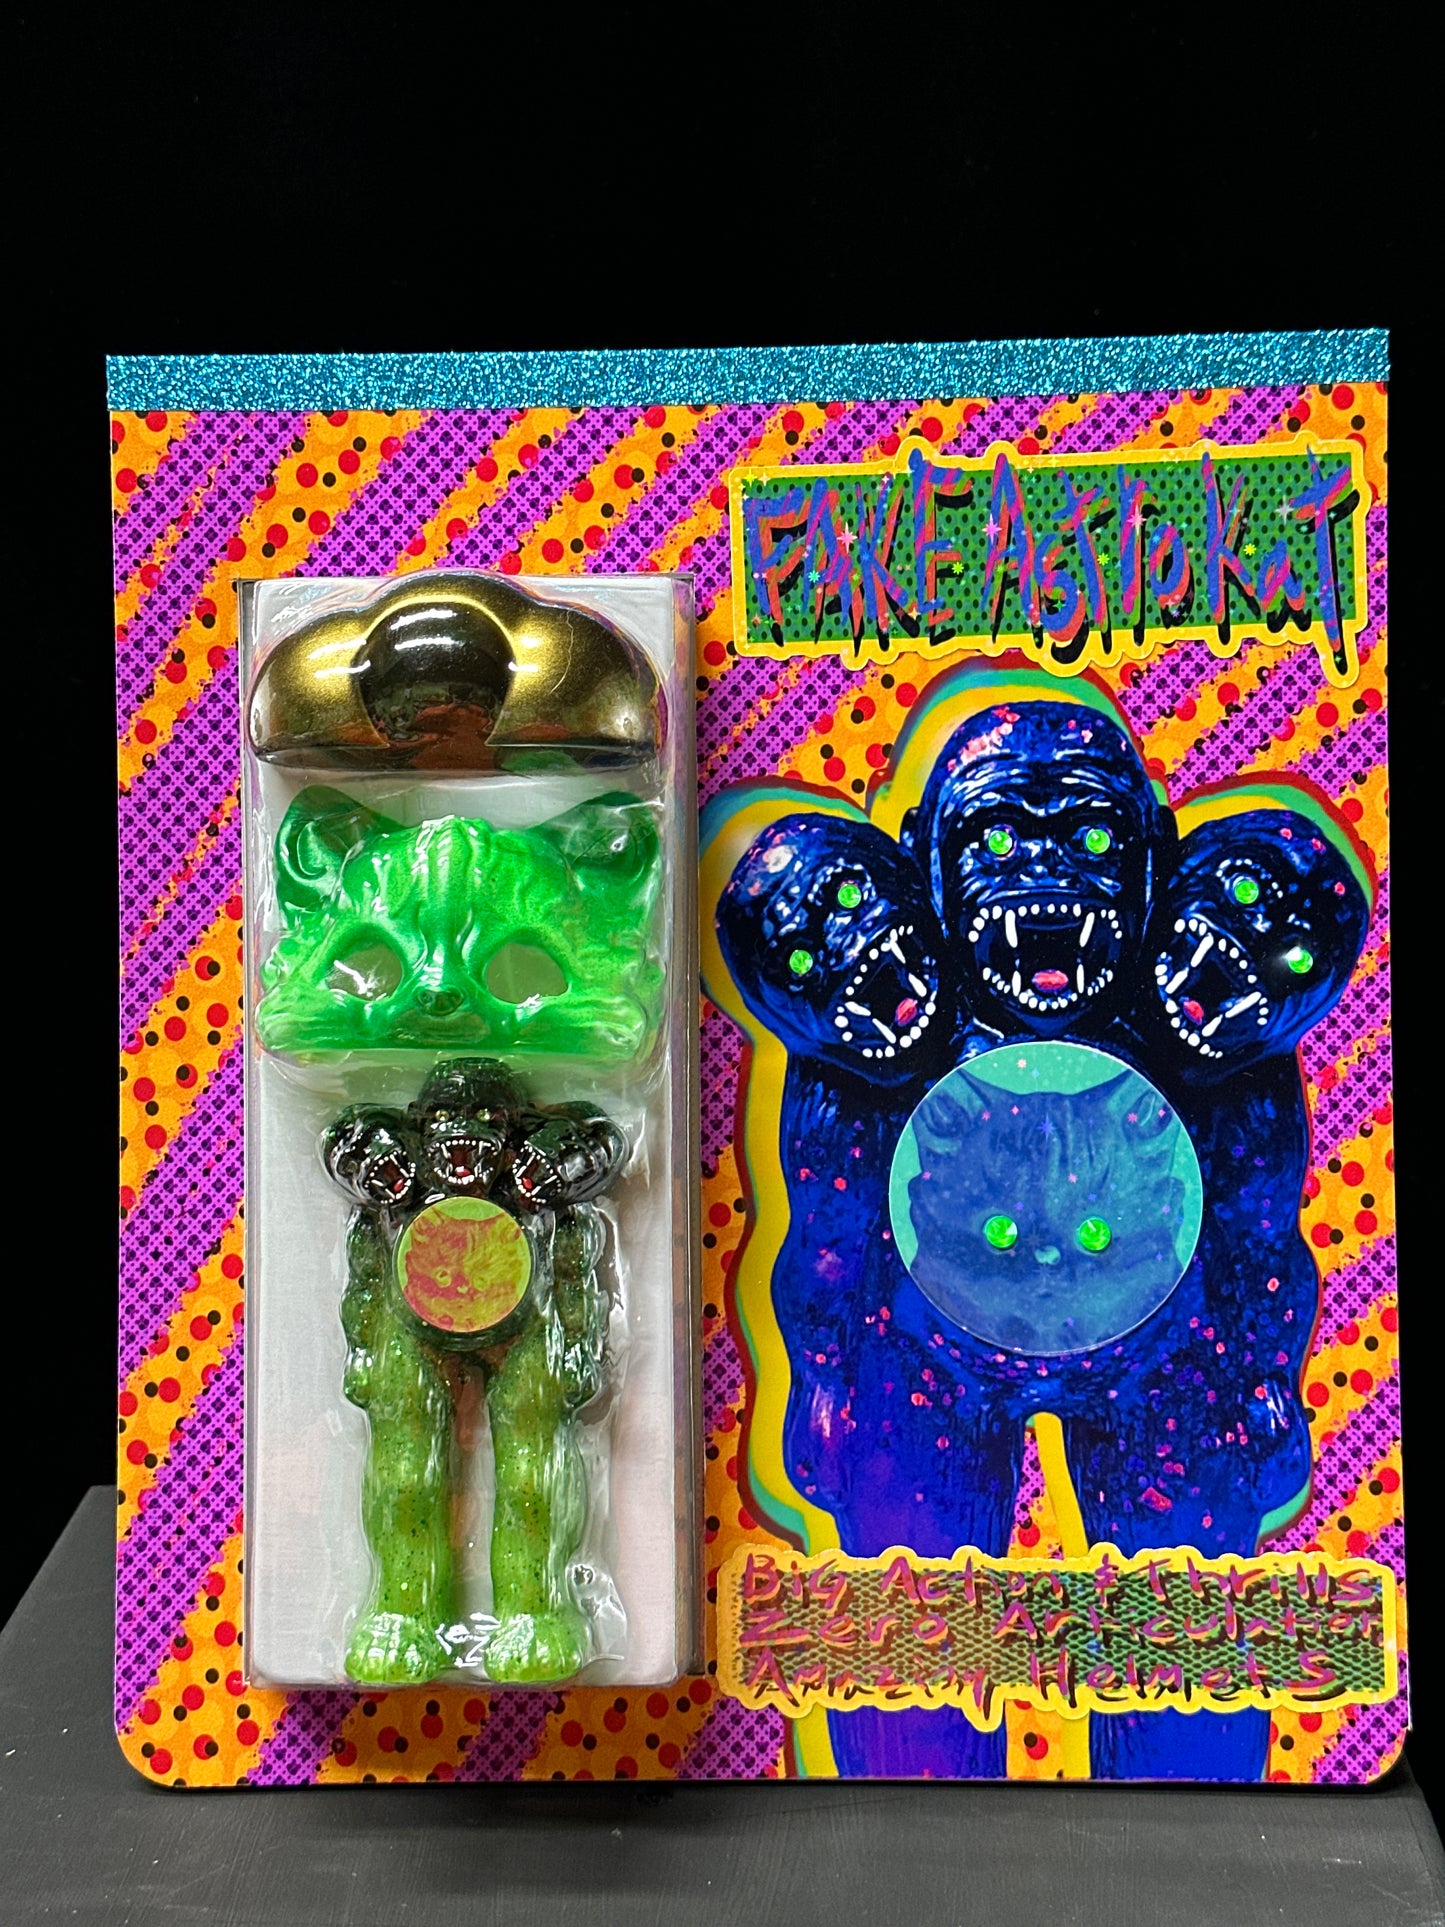 FAKE AstroKat: Green with Glitter (Limited Deluxe Package)